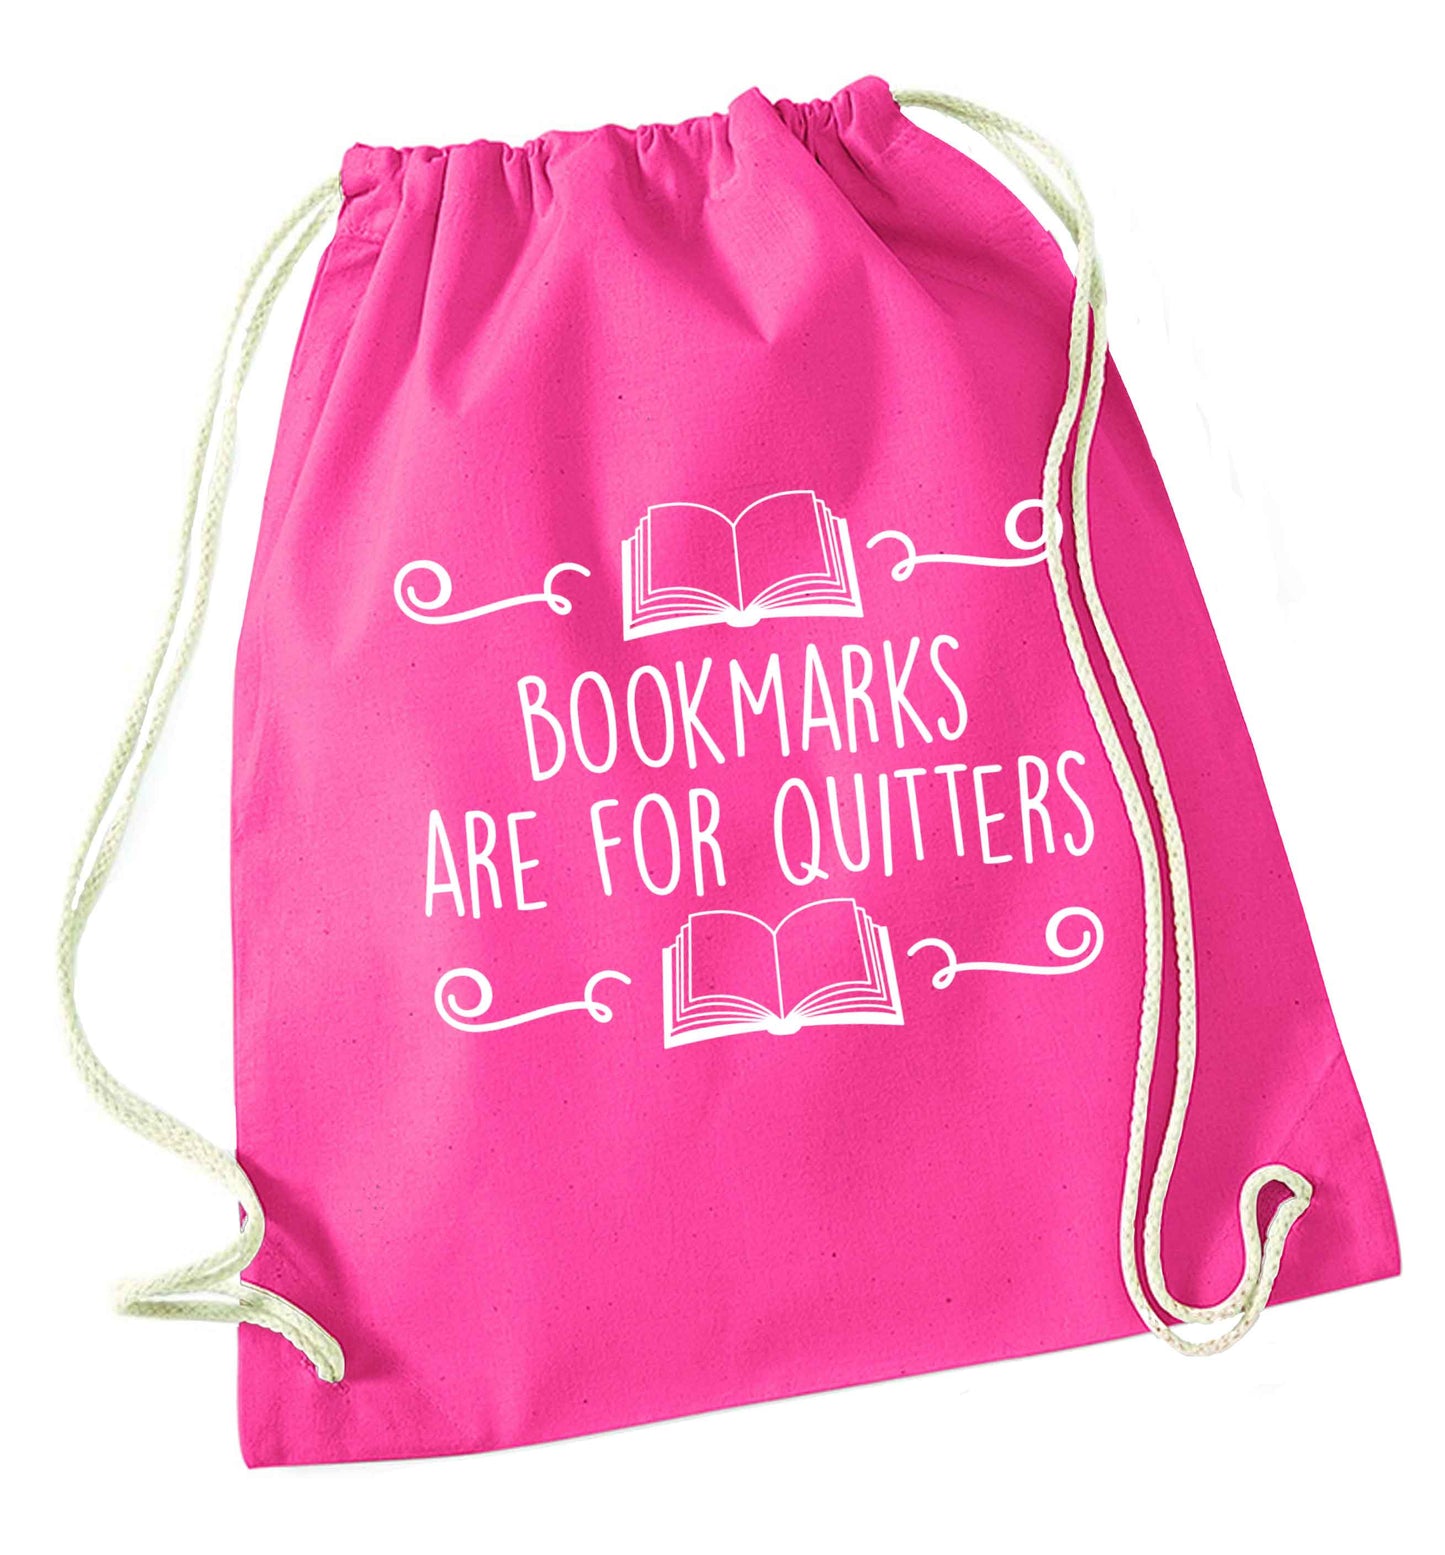 Bookmarks are for quitters pink drawstring bag